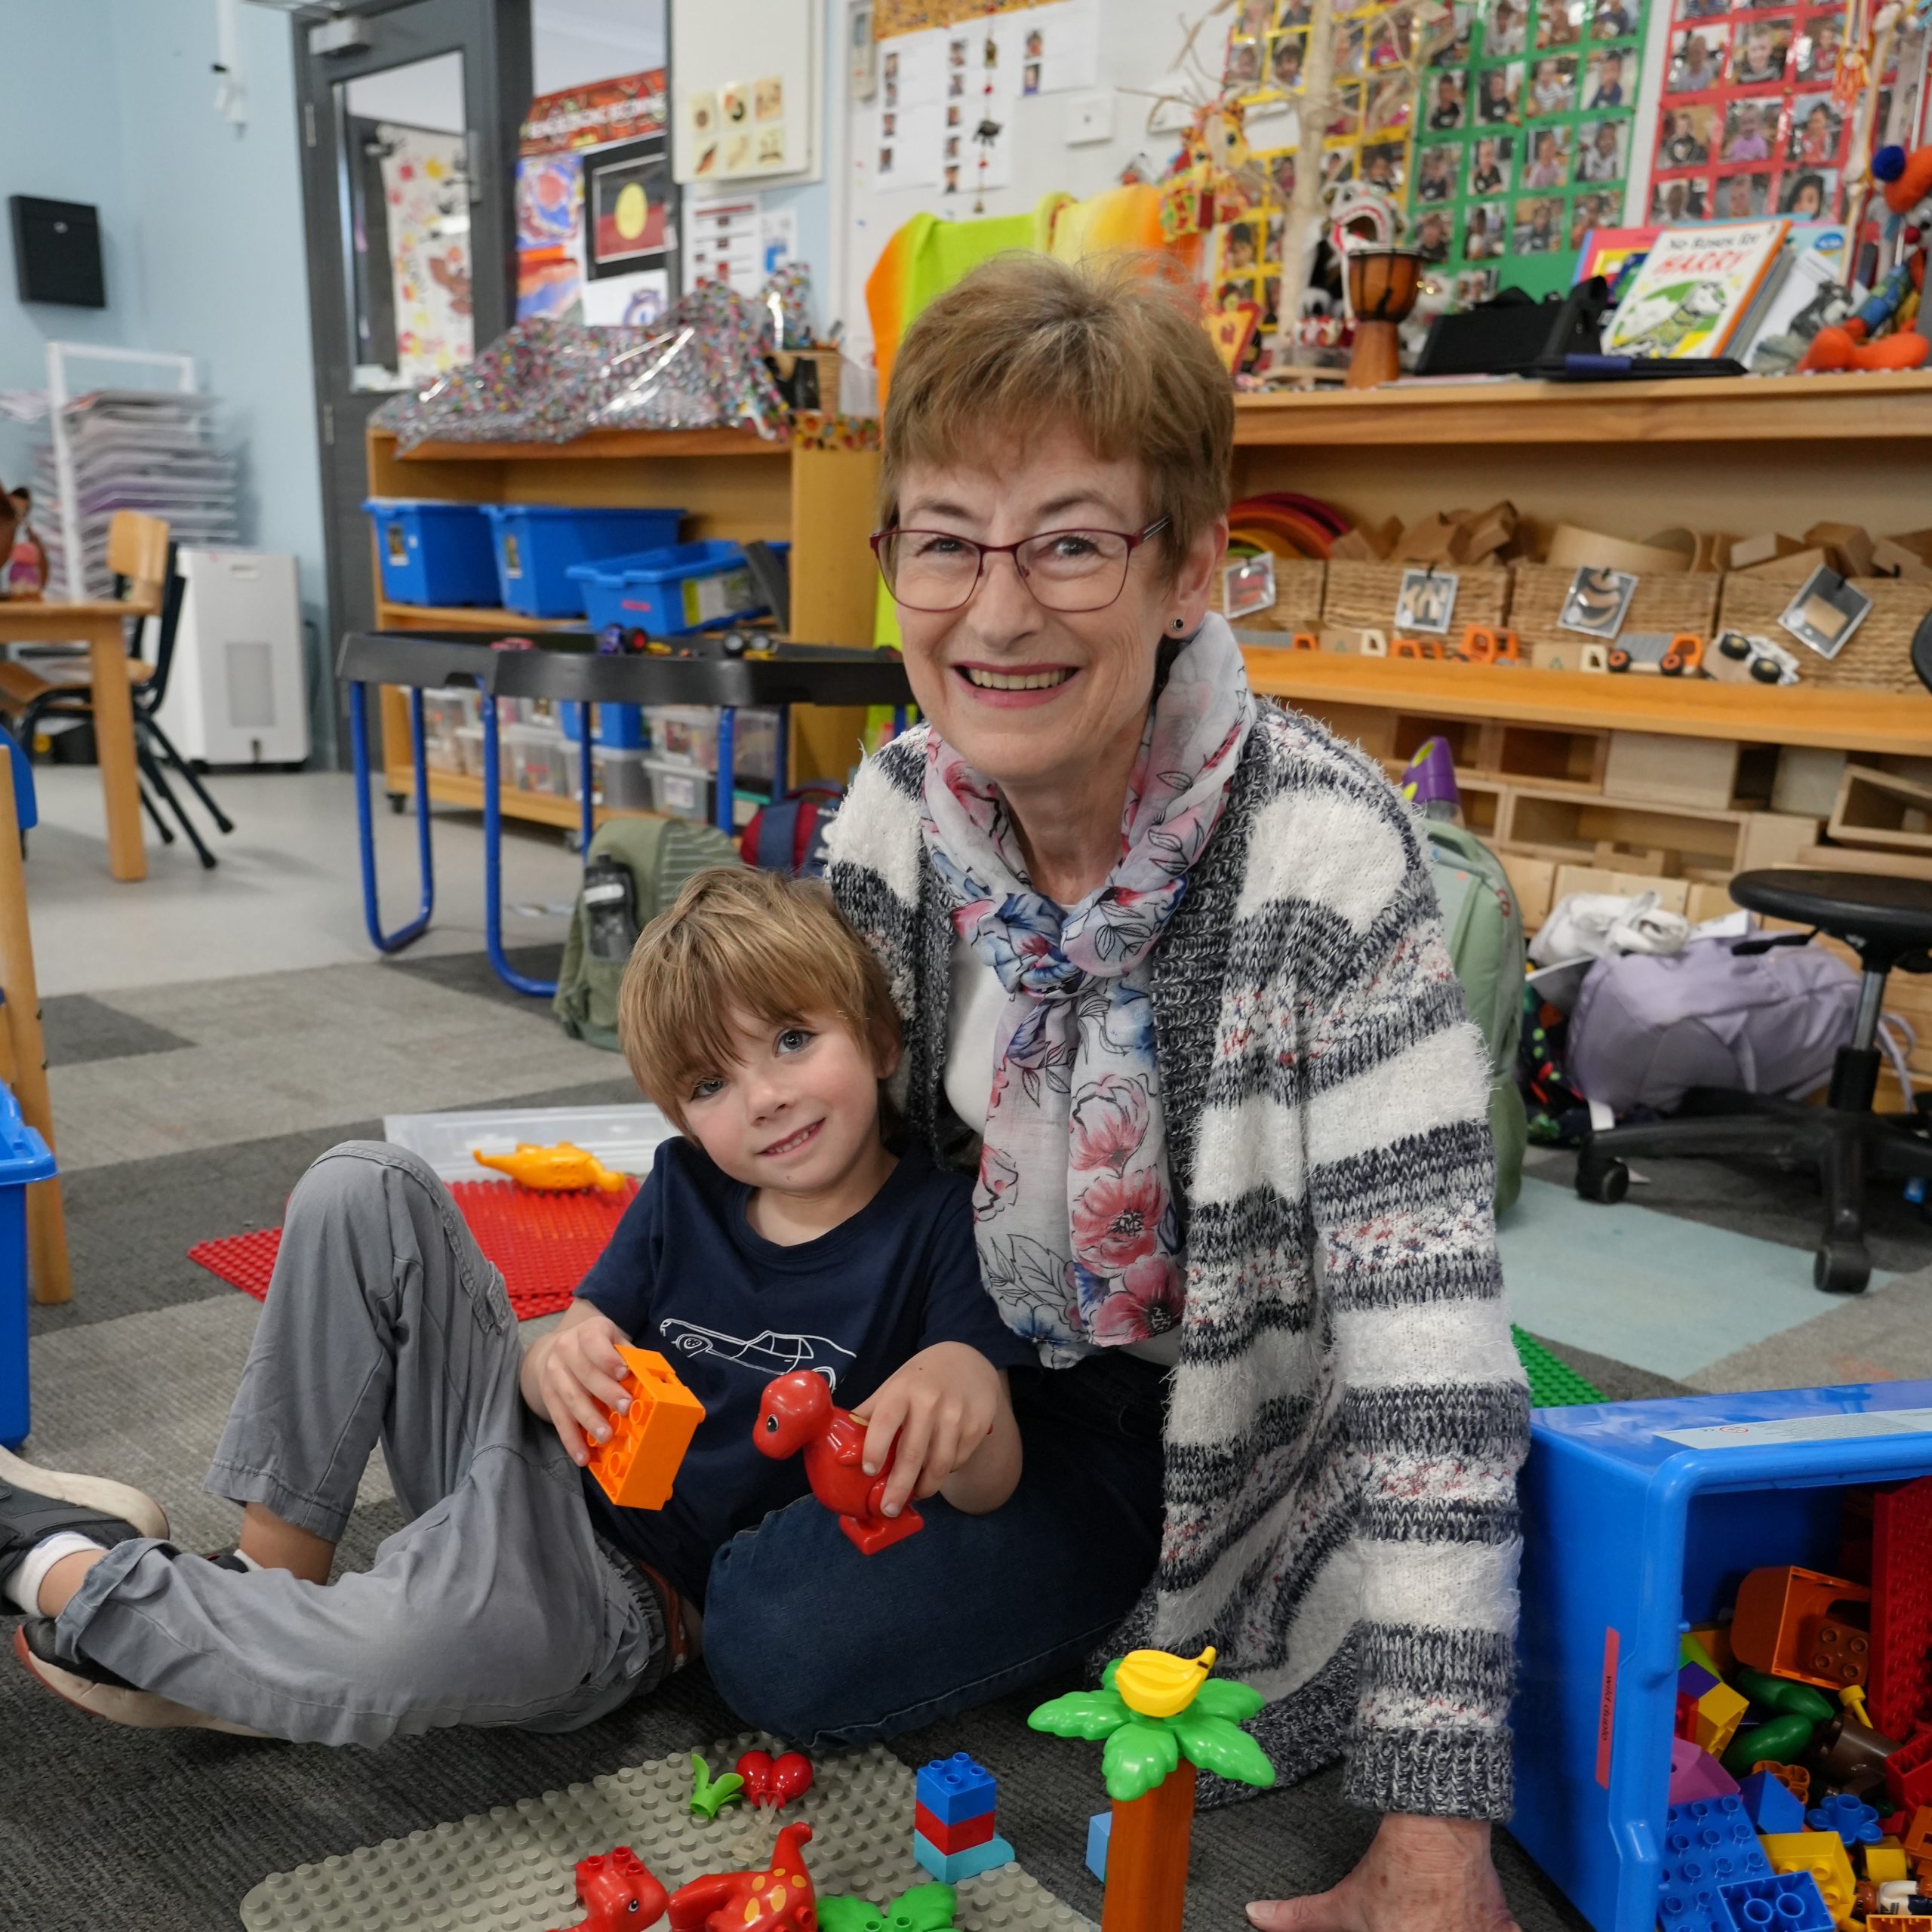 This is a photo of Belinda, she is sitting with a kindergarten child, he is playing with blocks